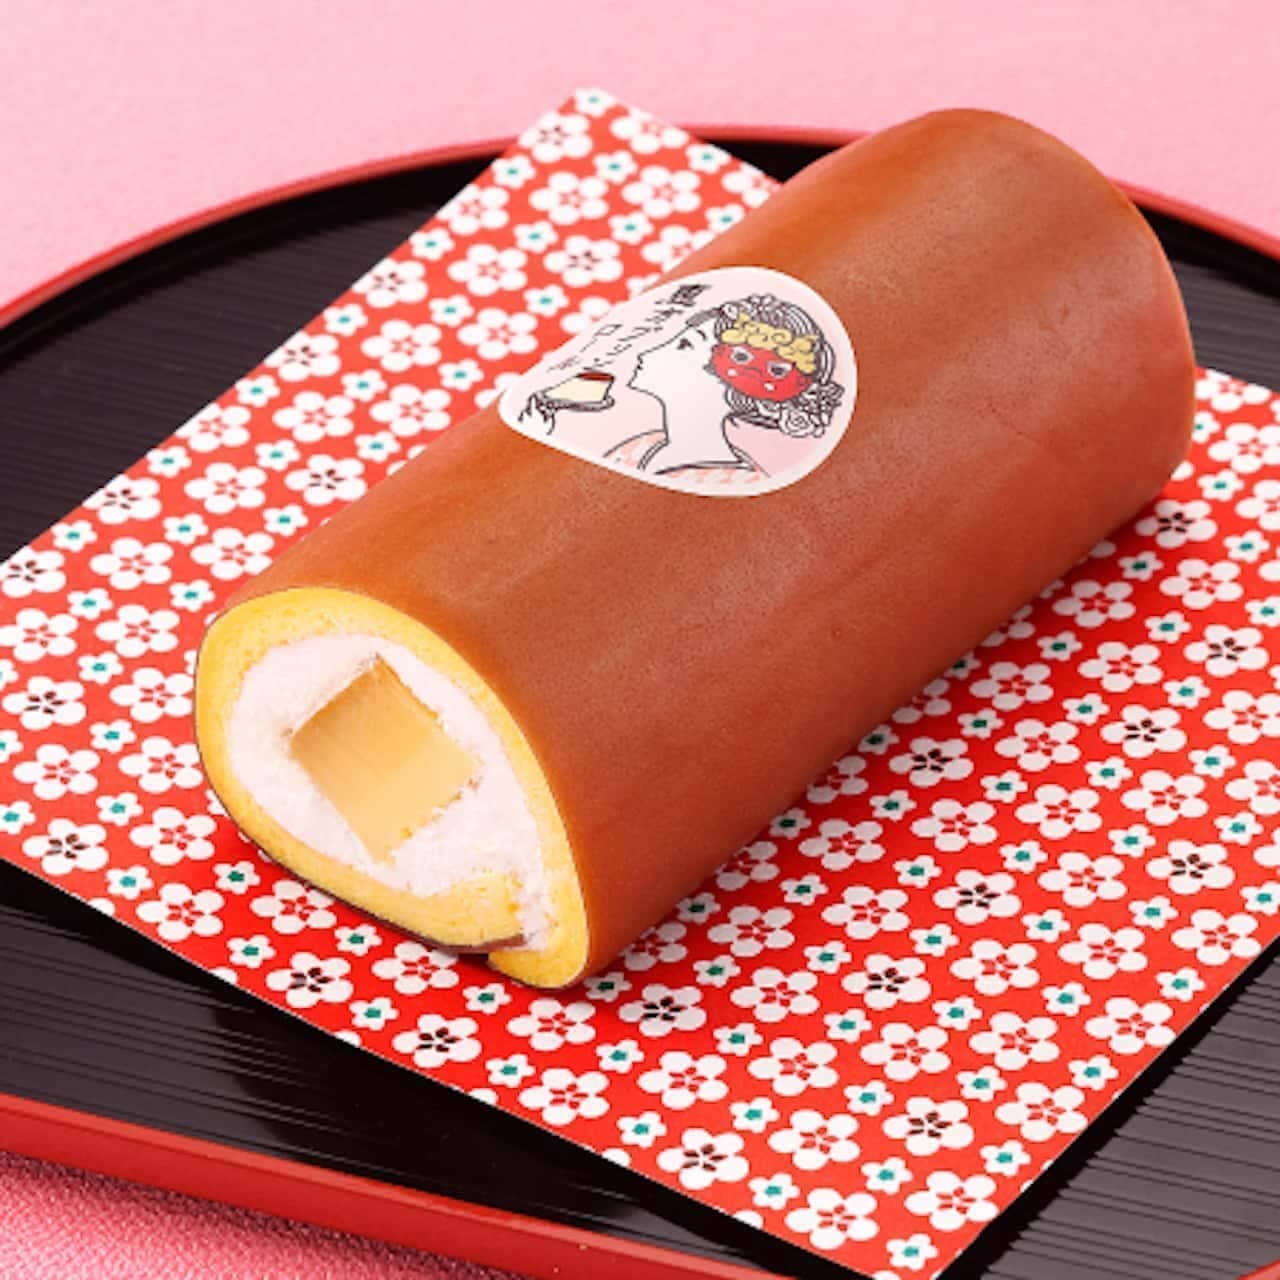 In love with pudding, "Eboshi Pudding Roll" limited to 3 days